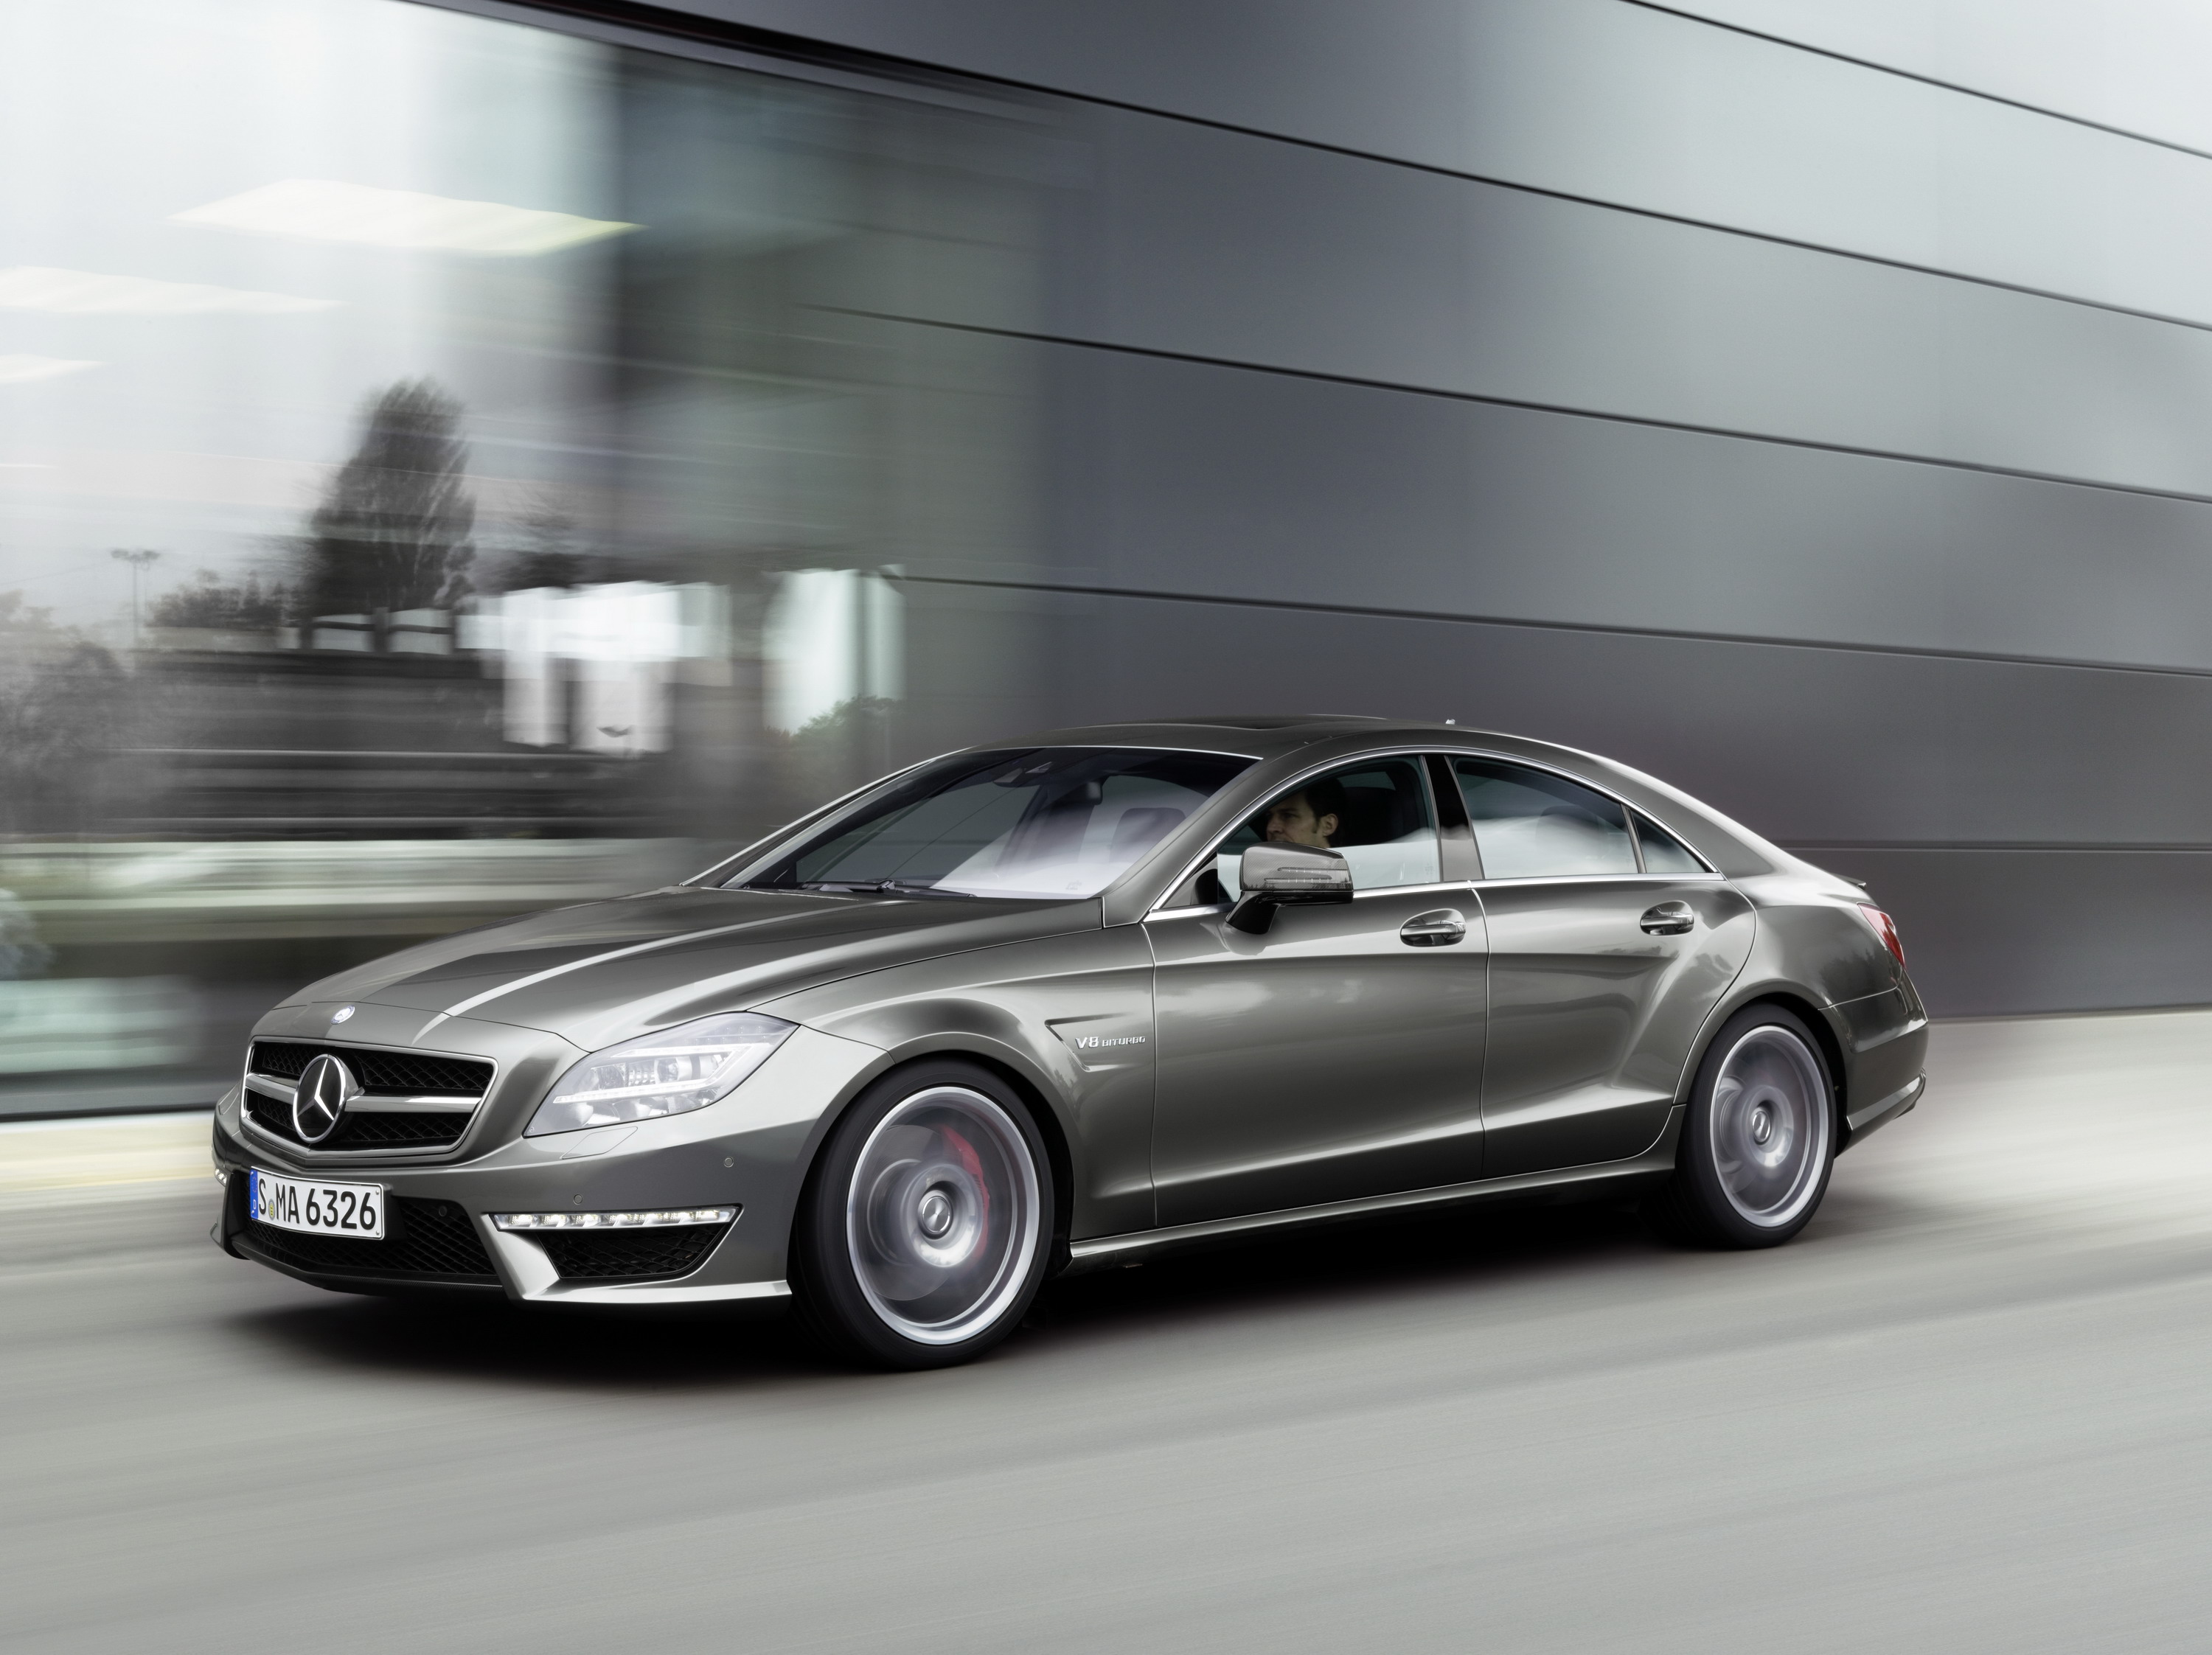 Mercedes Cls63 Amg Coupe - HD Wallpaper 